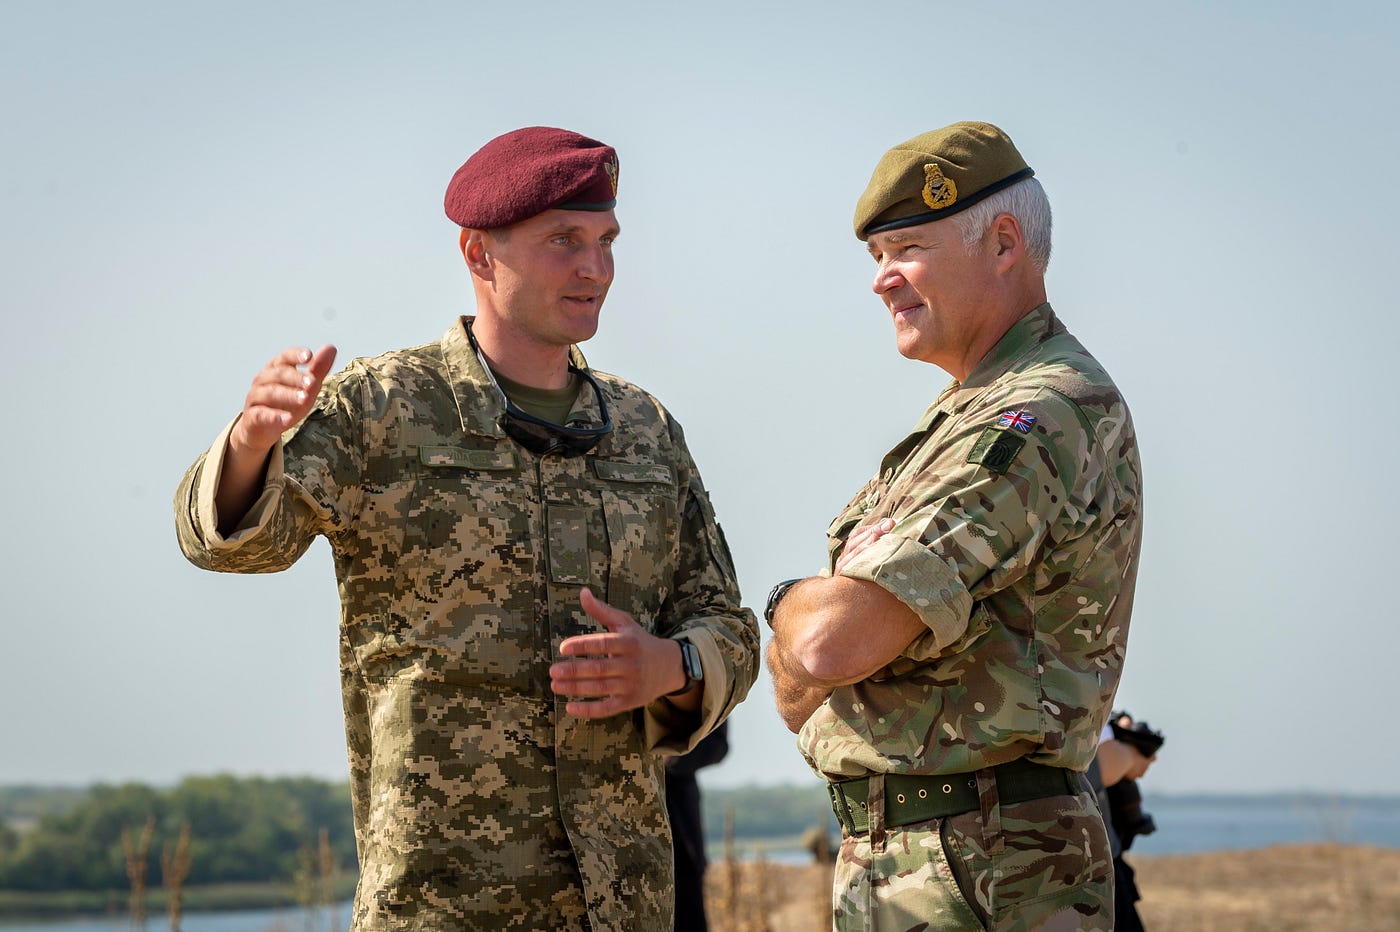 Major General Ian Cave, Chief of Staff, Field Army, speaks to a member of The Ukrainian military about the demonstration betw